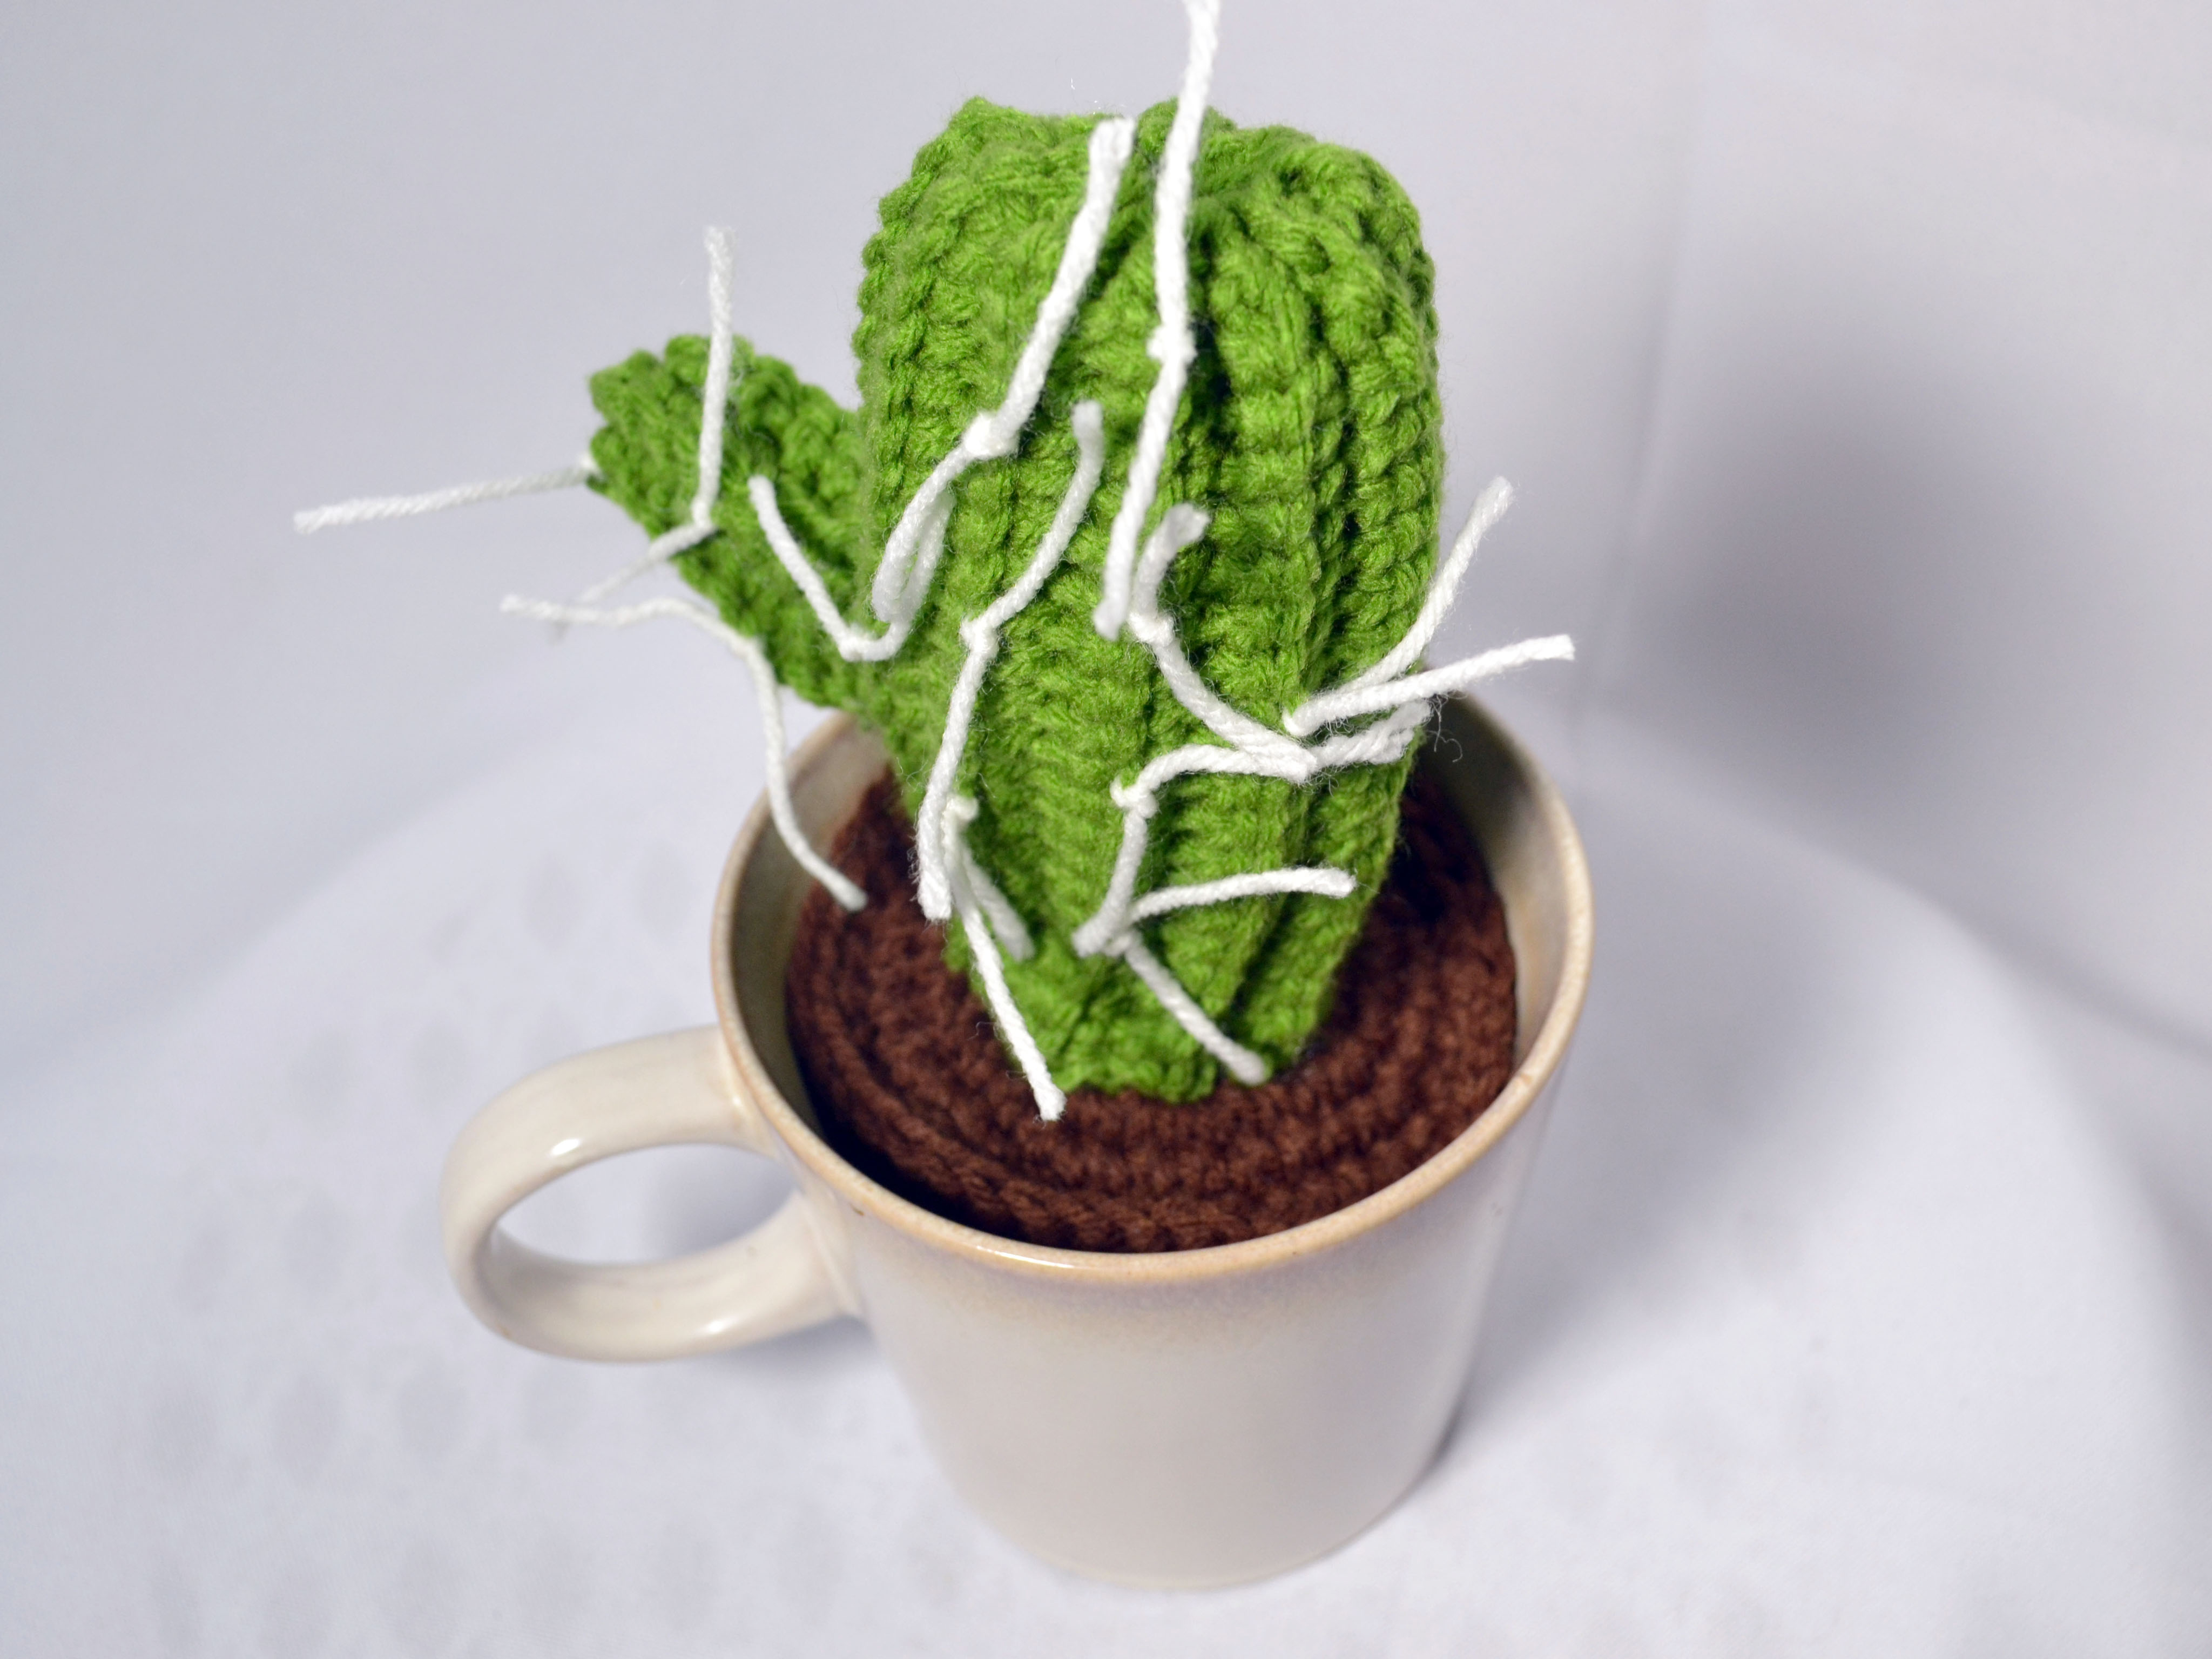 Crochet Cactus Pattern 5 Ways To Crochet A Cactus Wikihow